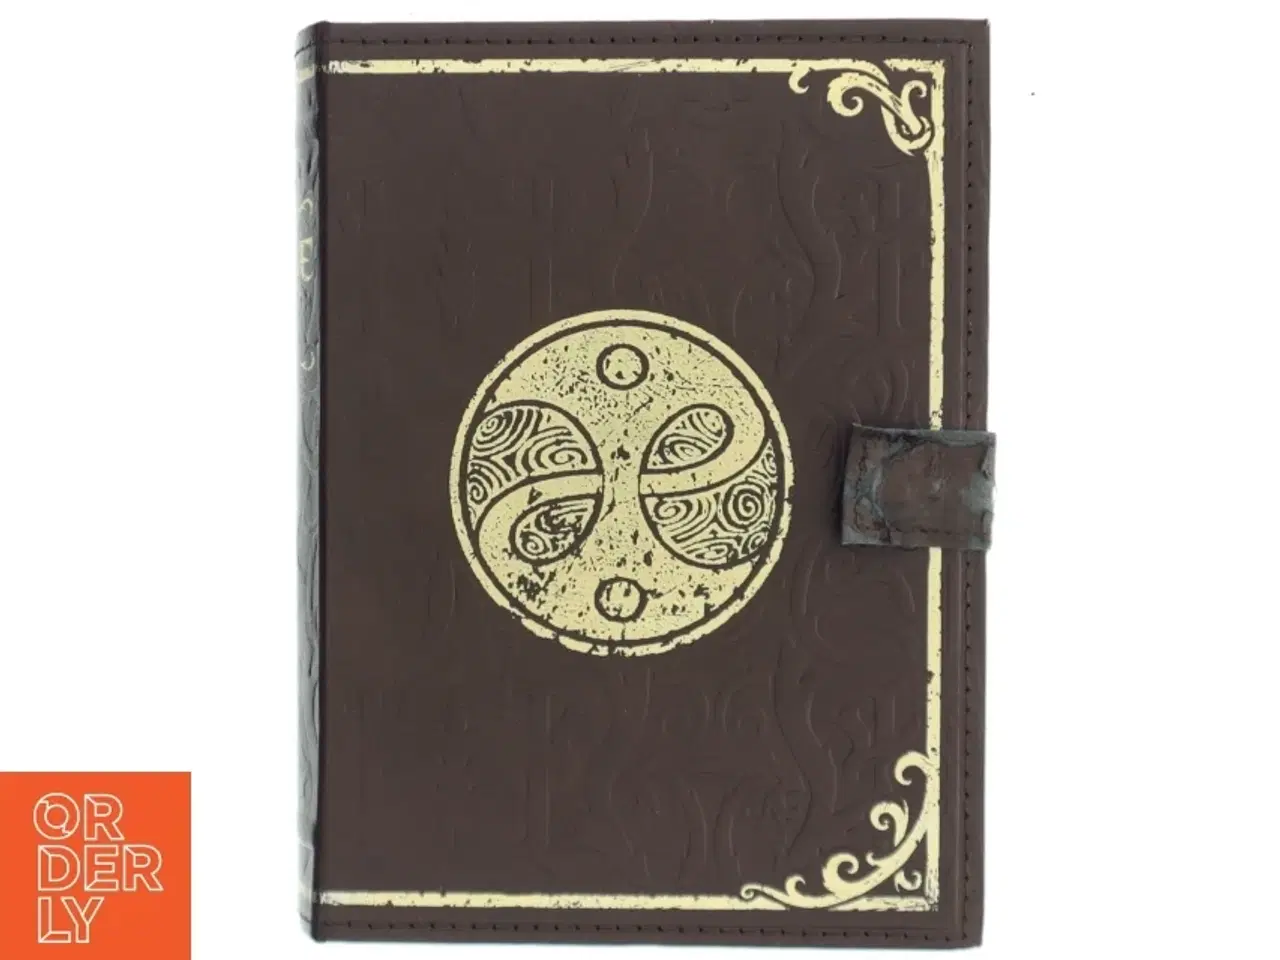 Billede 3 - Fable III Limited Collector's Edition Spil fra Microsoft